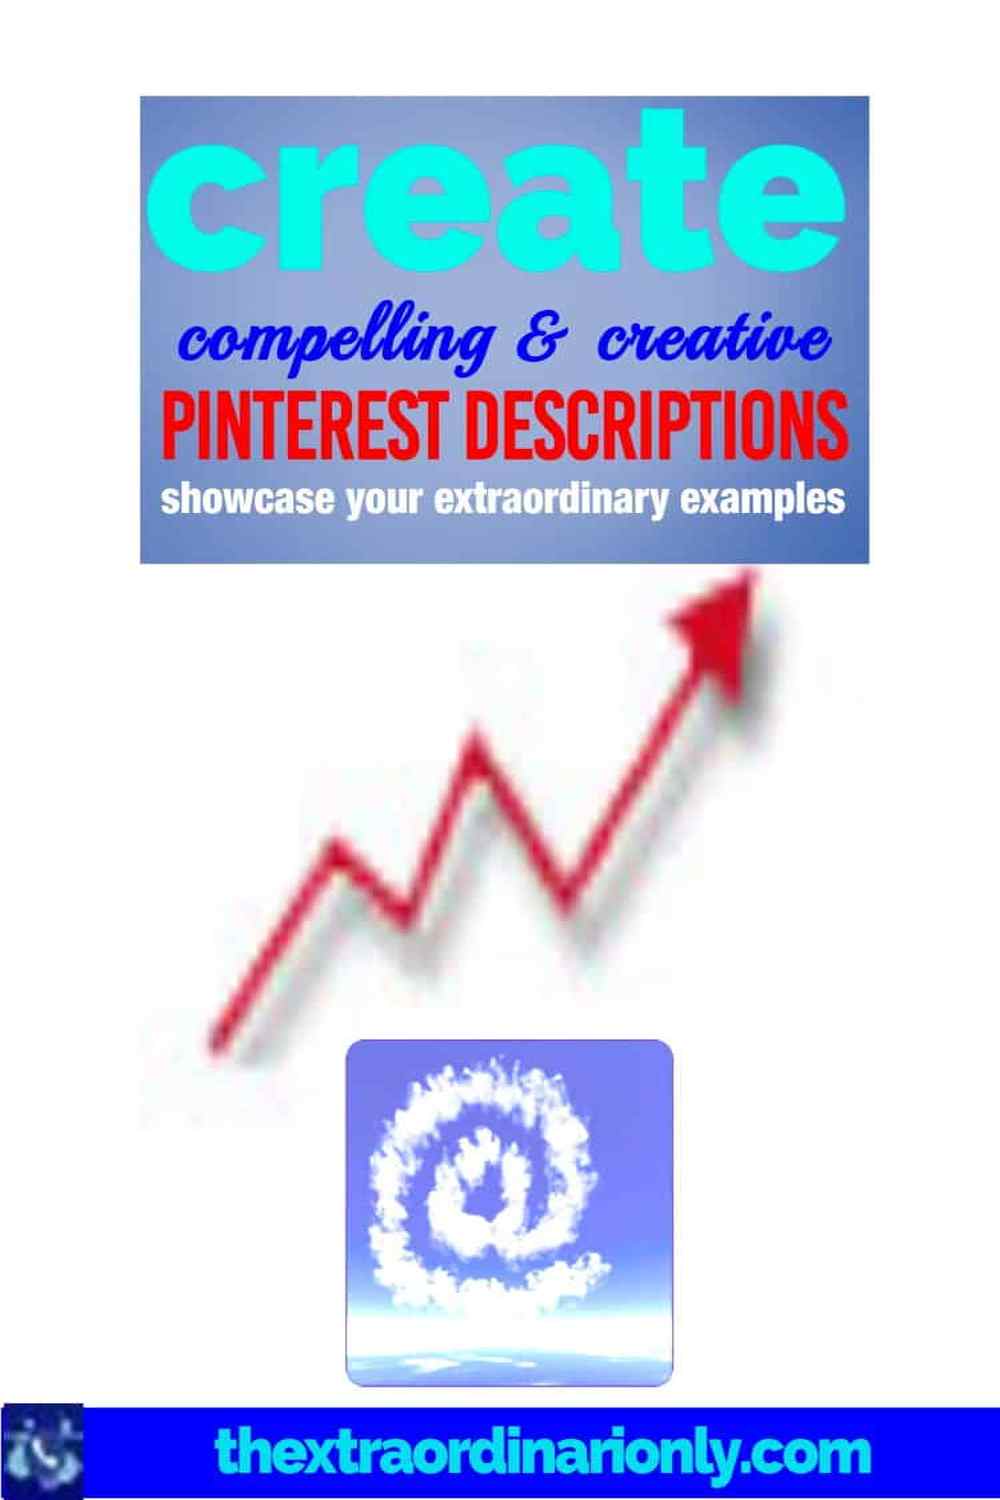 create compelling and creative Pinterest descriptions to show case extraordinary examples